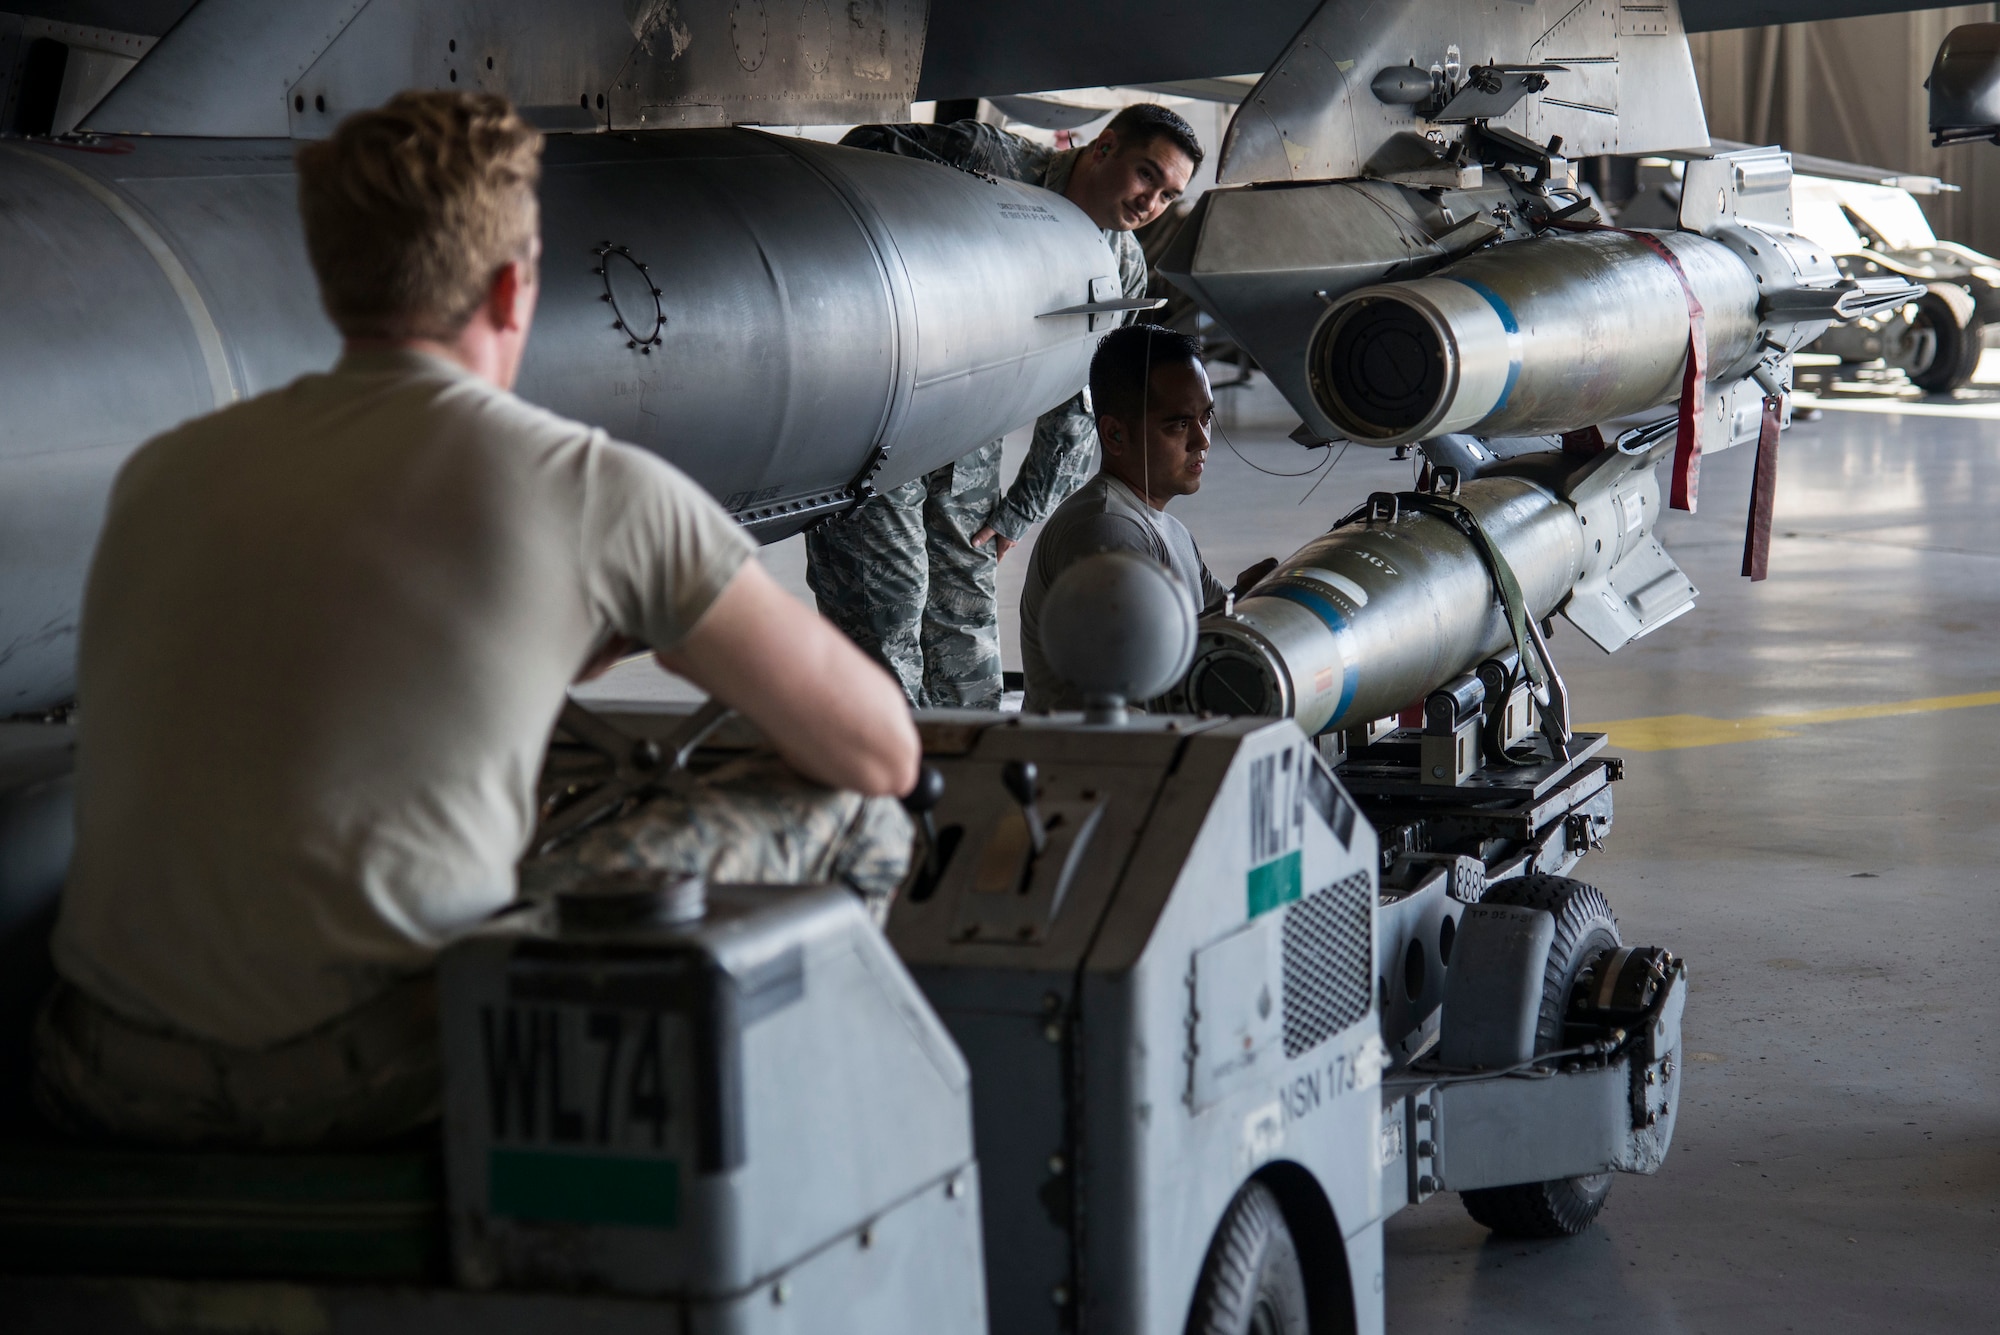 U.S. Air Force Senior Airman Jonathan Paulukaitis, 20th Aircraft Maintenance Squadron (AMXS) load crew member, left, and Staff Sgt. Joaquin Arevalo, 20th AMXS load crew team chief, right, attach a GBU-12 Paveway II laser-guided bomb to the wing of an F-16CM Fighting Falcon, while Staff Sgt. William Bernhardt, 20th AMXS load crew evaluator, observes the process for accuracy during a quarterly load crew competition at Shaw Air Force Base, S.C., Oct. 4, 2017.